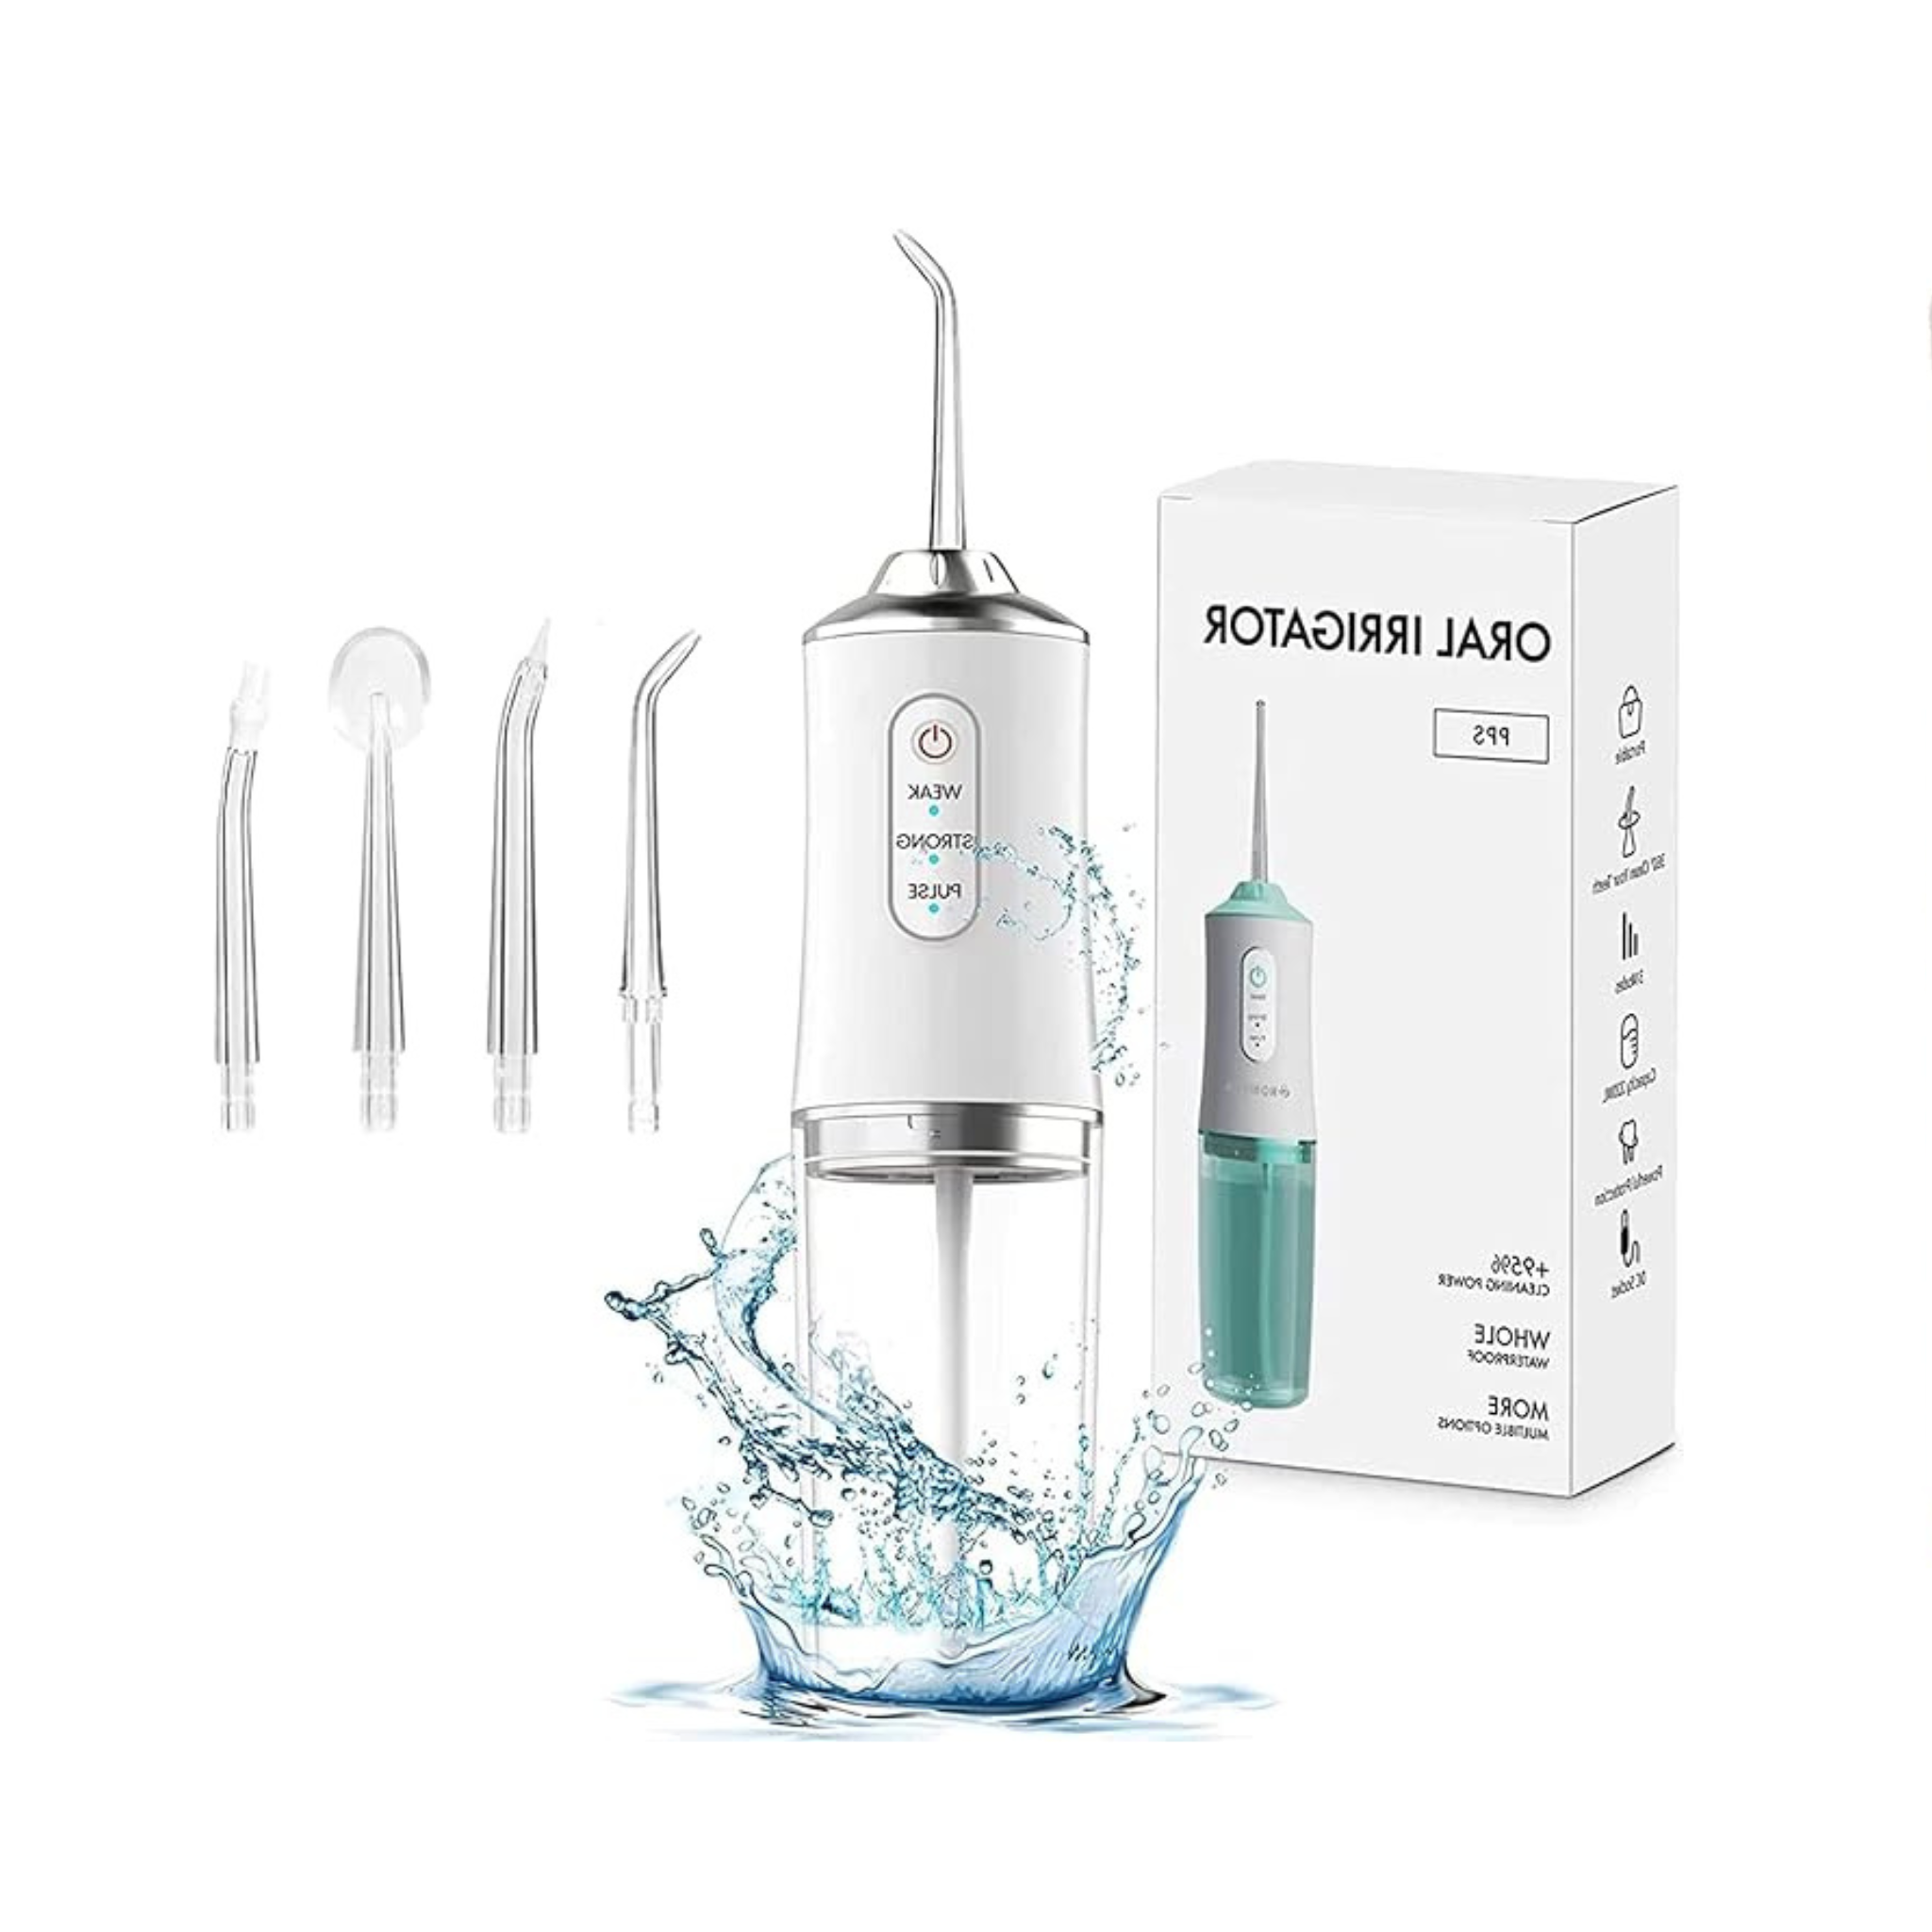 Cordless Dental Flosser with 3 Modes